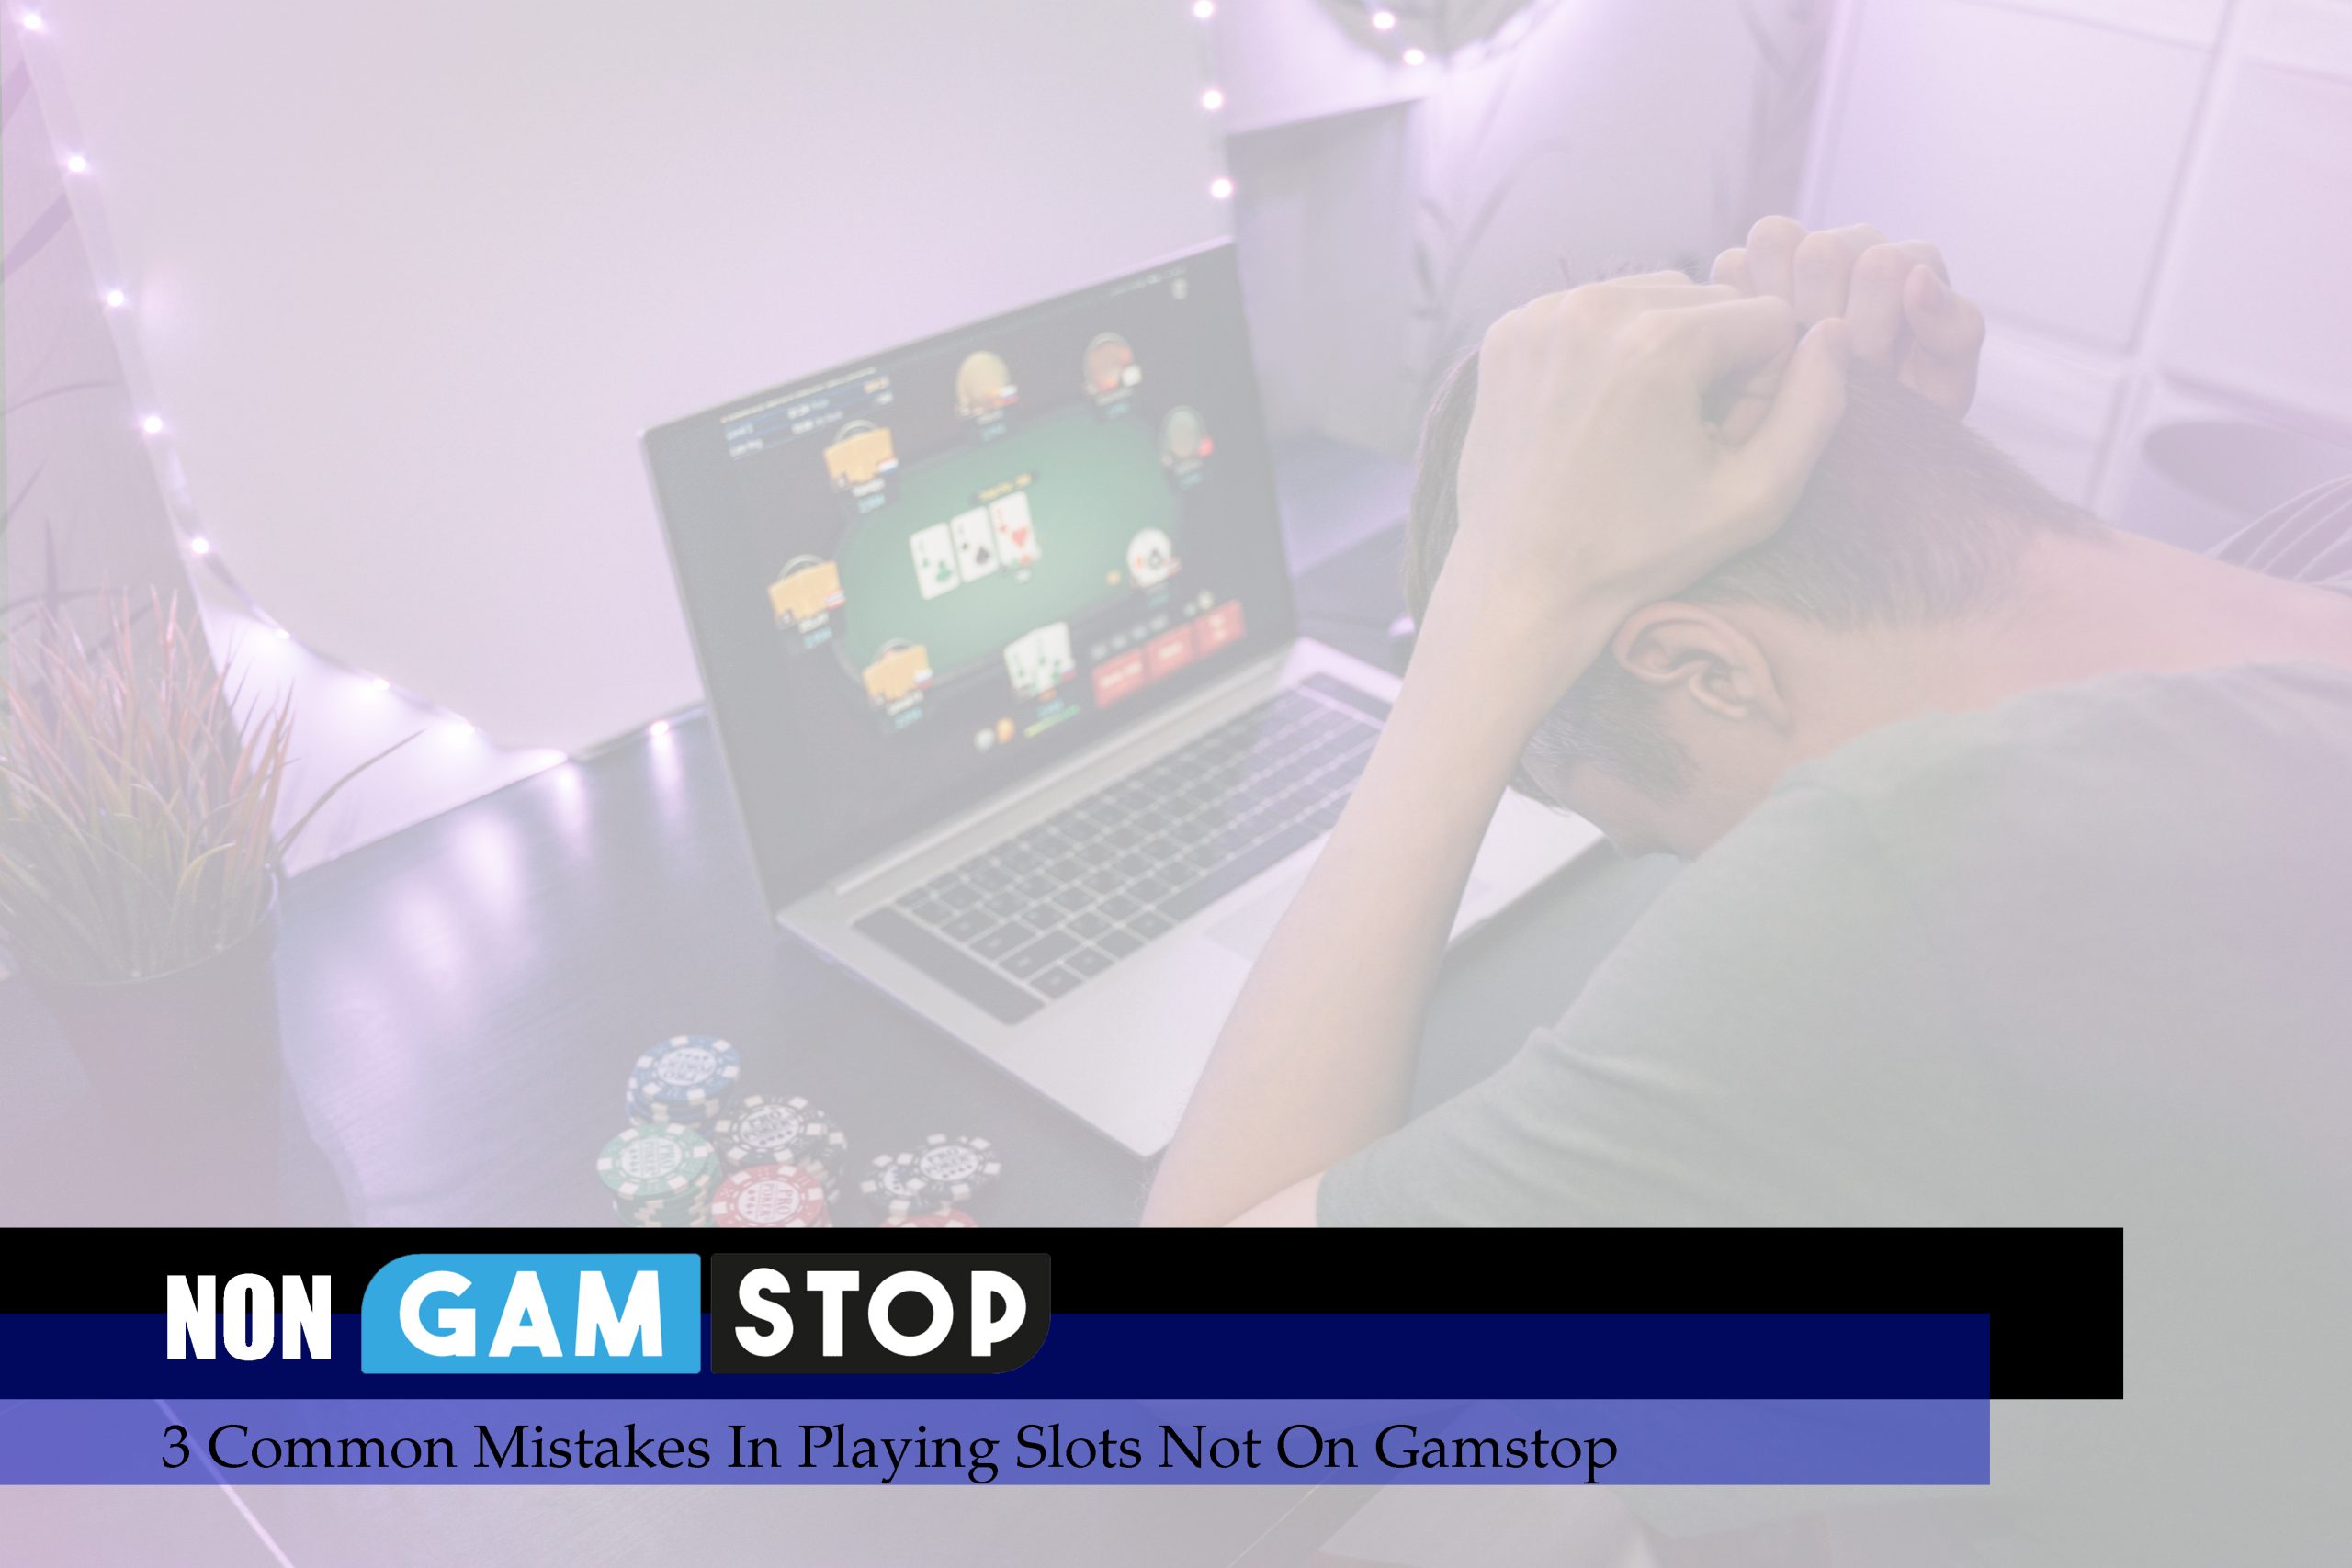 3 Common Mistakes In Playing Slots Not On Gamstop